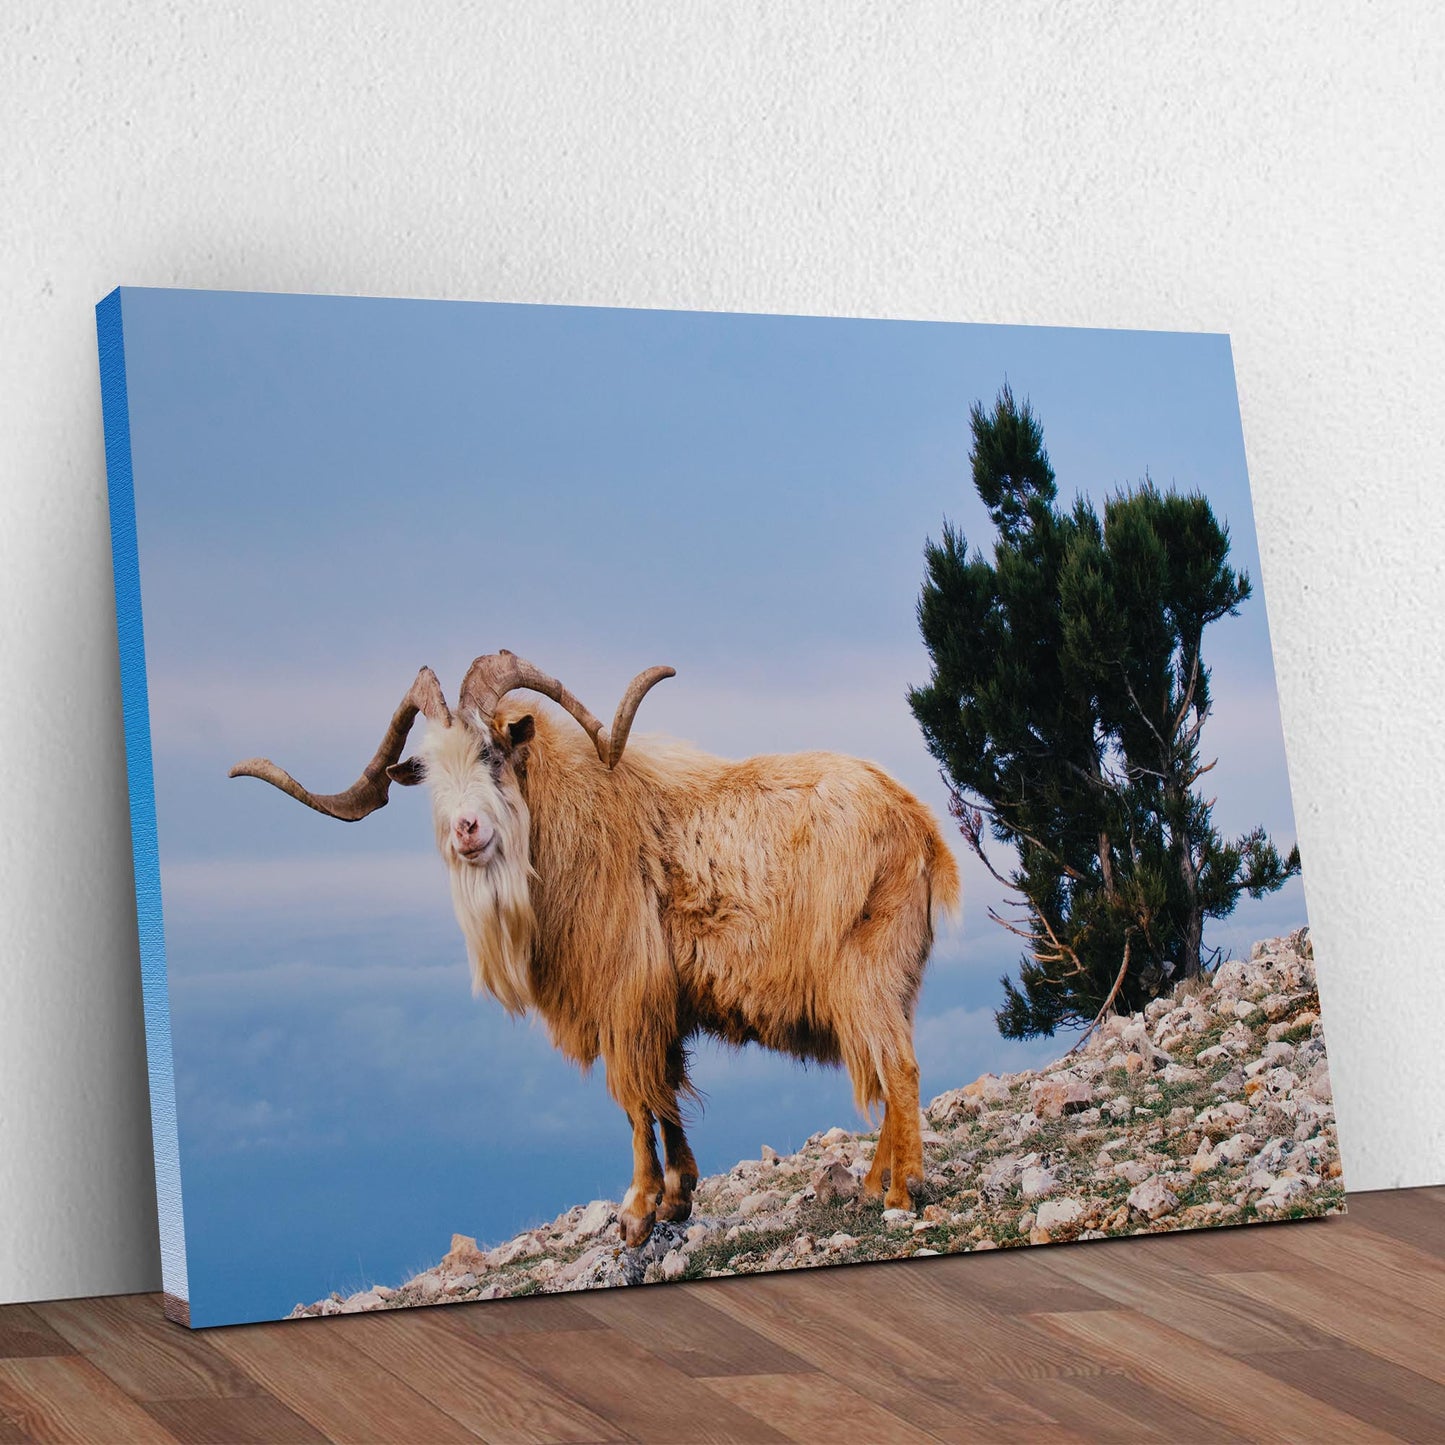 Wild Mountain Goat Canvas Wall Art Style 2 - Image by Tailored Canvases